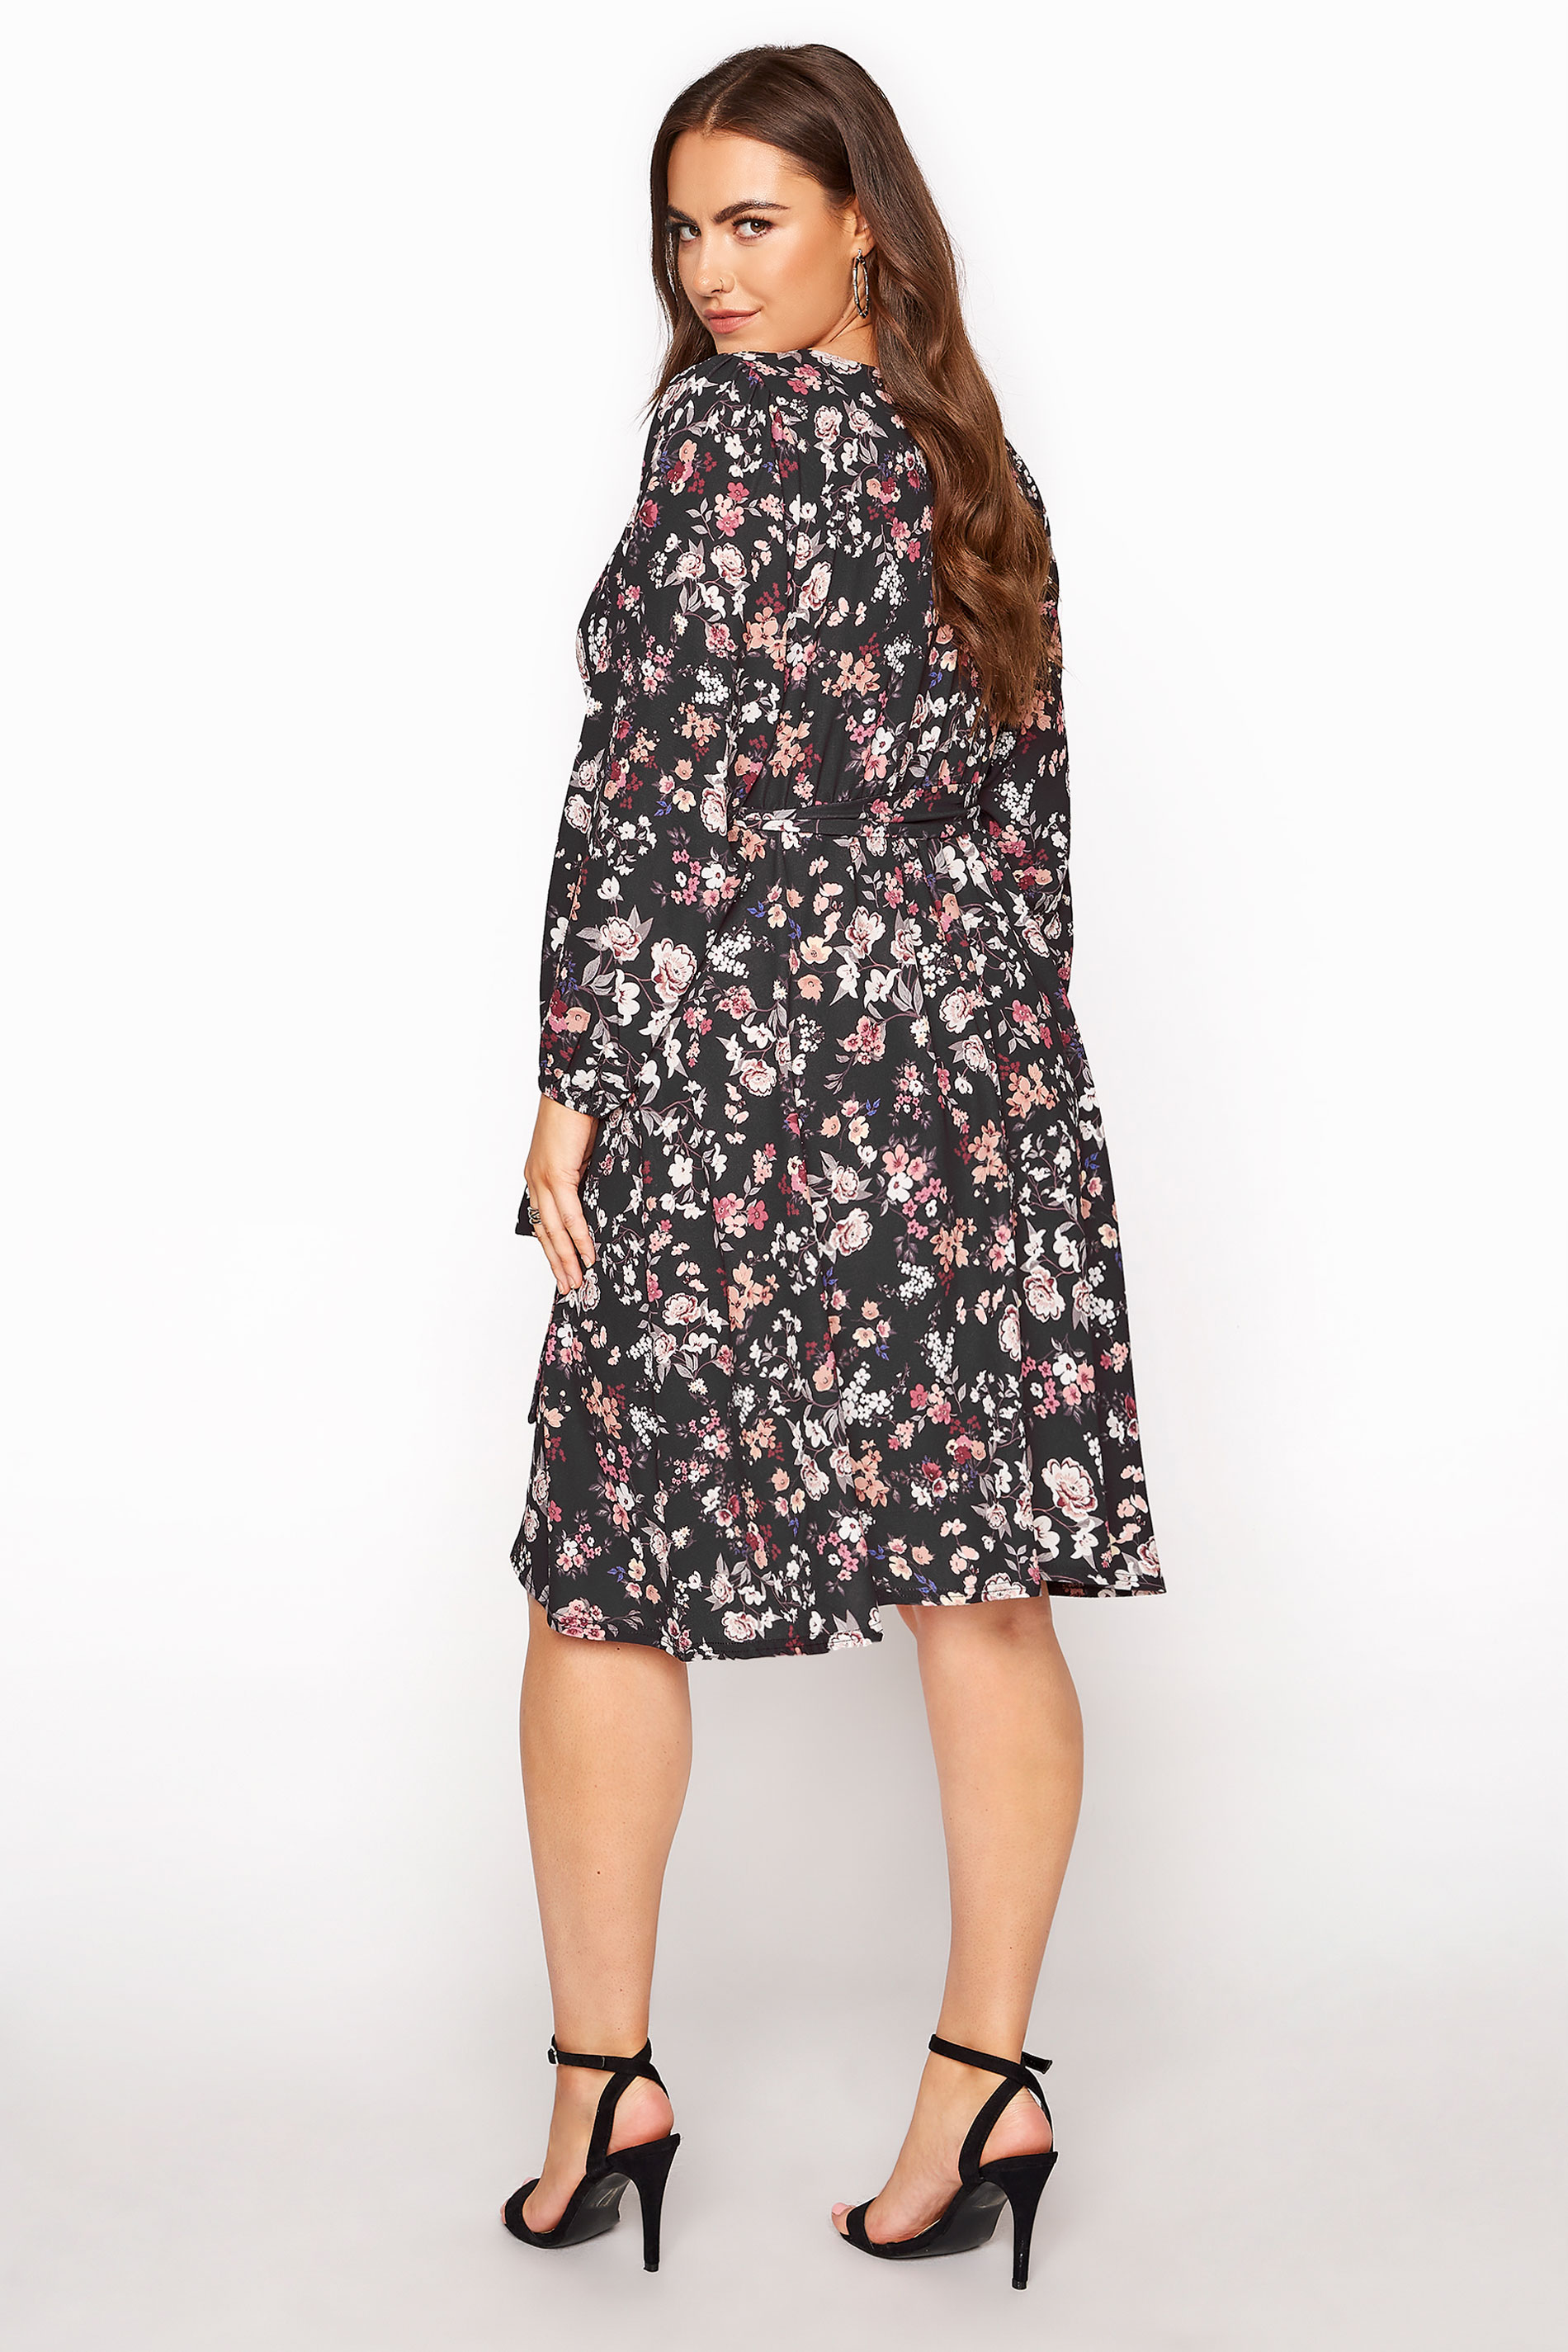 Robes Grande Taille Grande taille  Robes Portefeuilles | YOURS LONDON - Robe Noire Floral Midi Cache-Coeur - MF63204